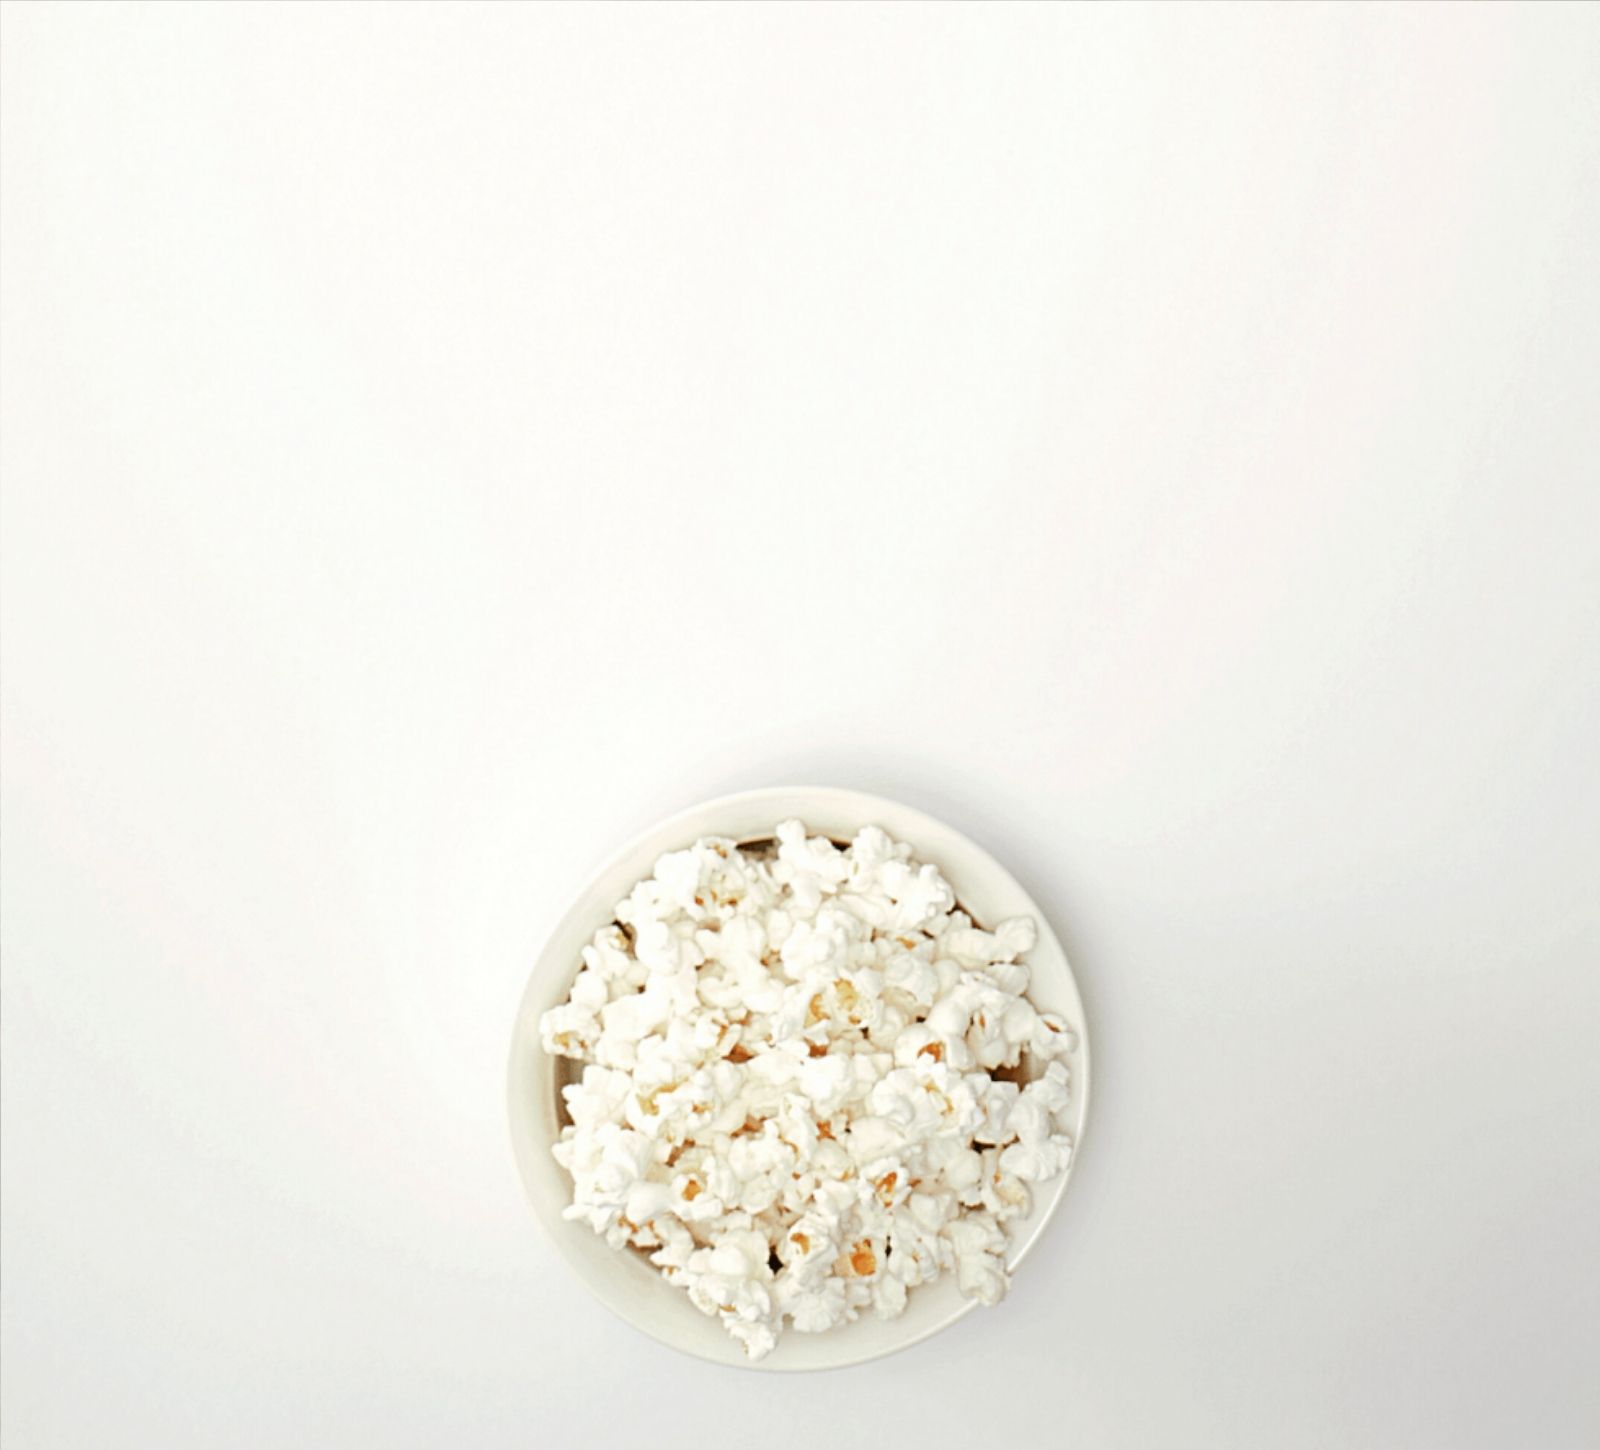 Kitchen Table CEOs Blog - Family-friendly movies for the entire family - family movie night- kitchen table ceos- by tracy smith - bowl of popcorn on a white table